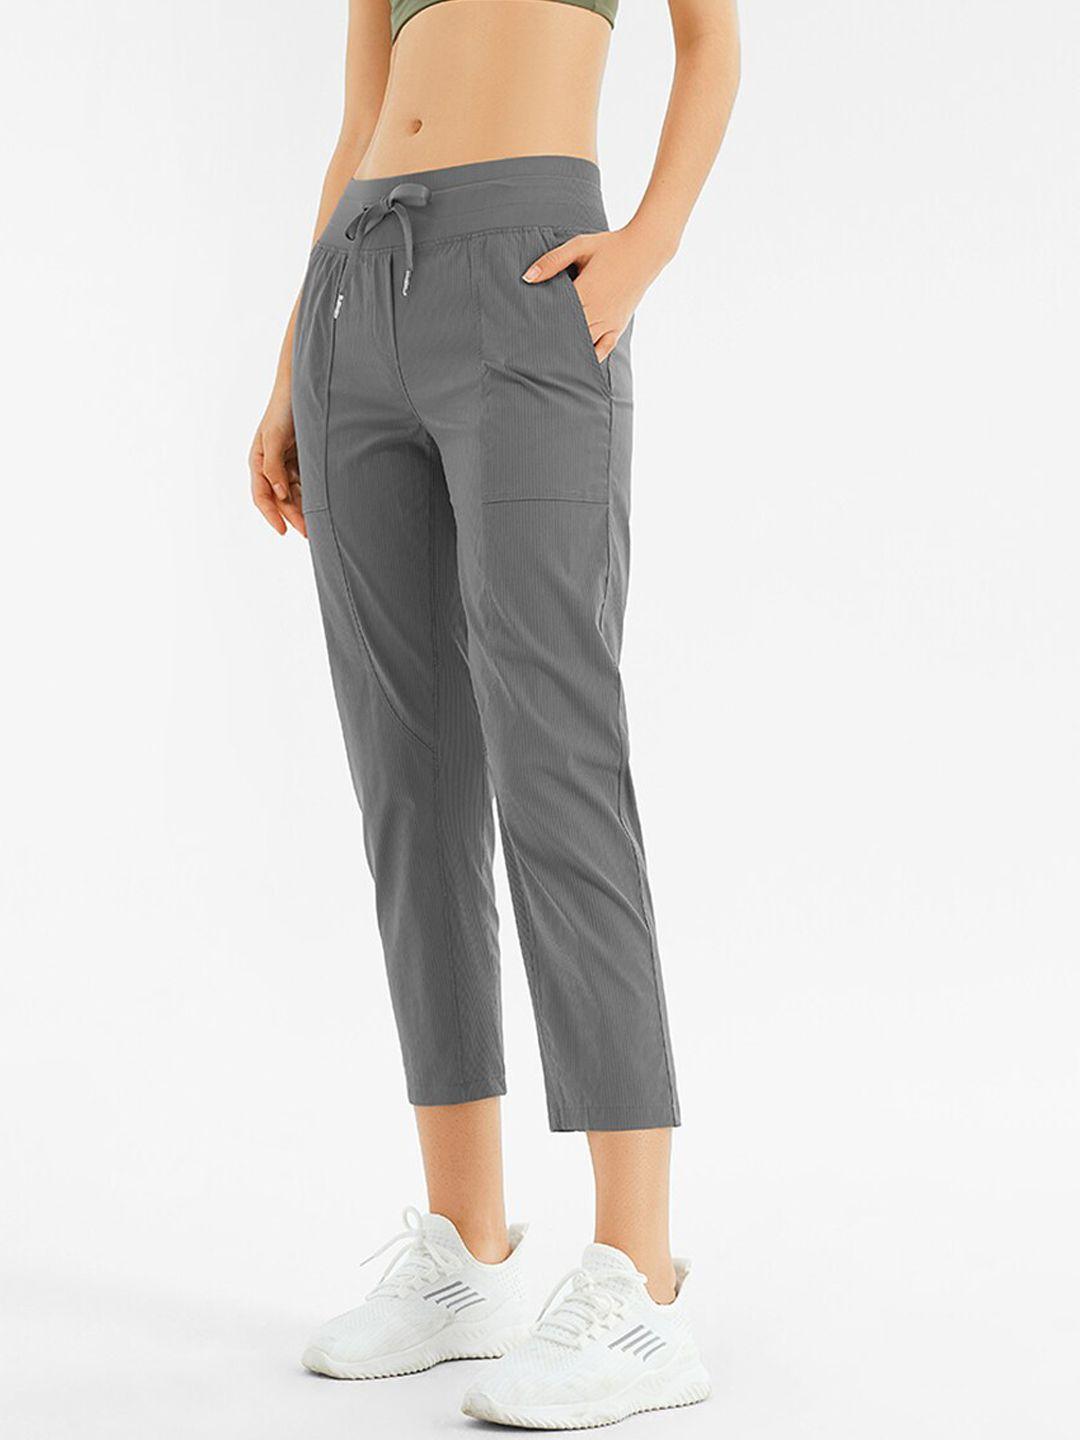 jc-collection-women-grey-solid-relaxed-fit-track-pants